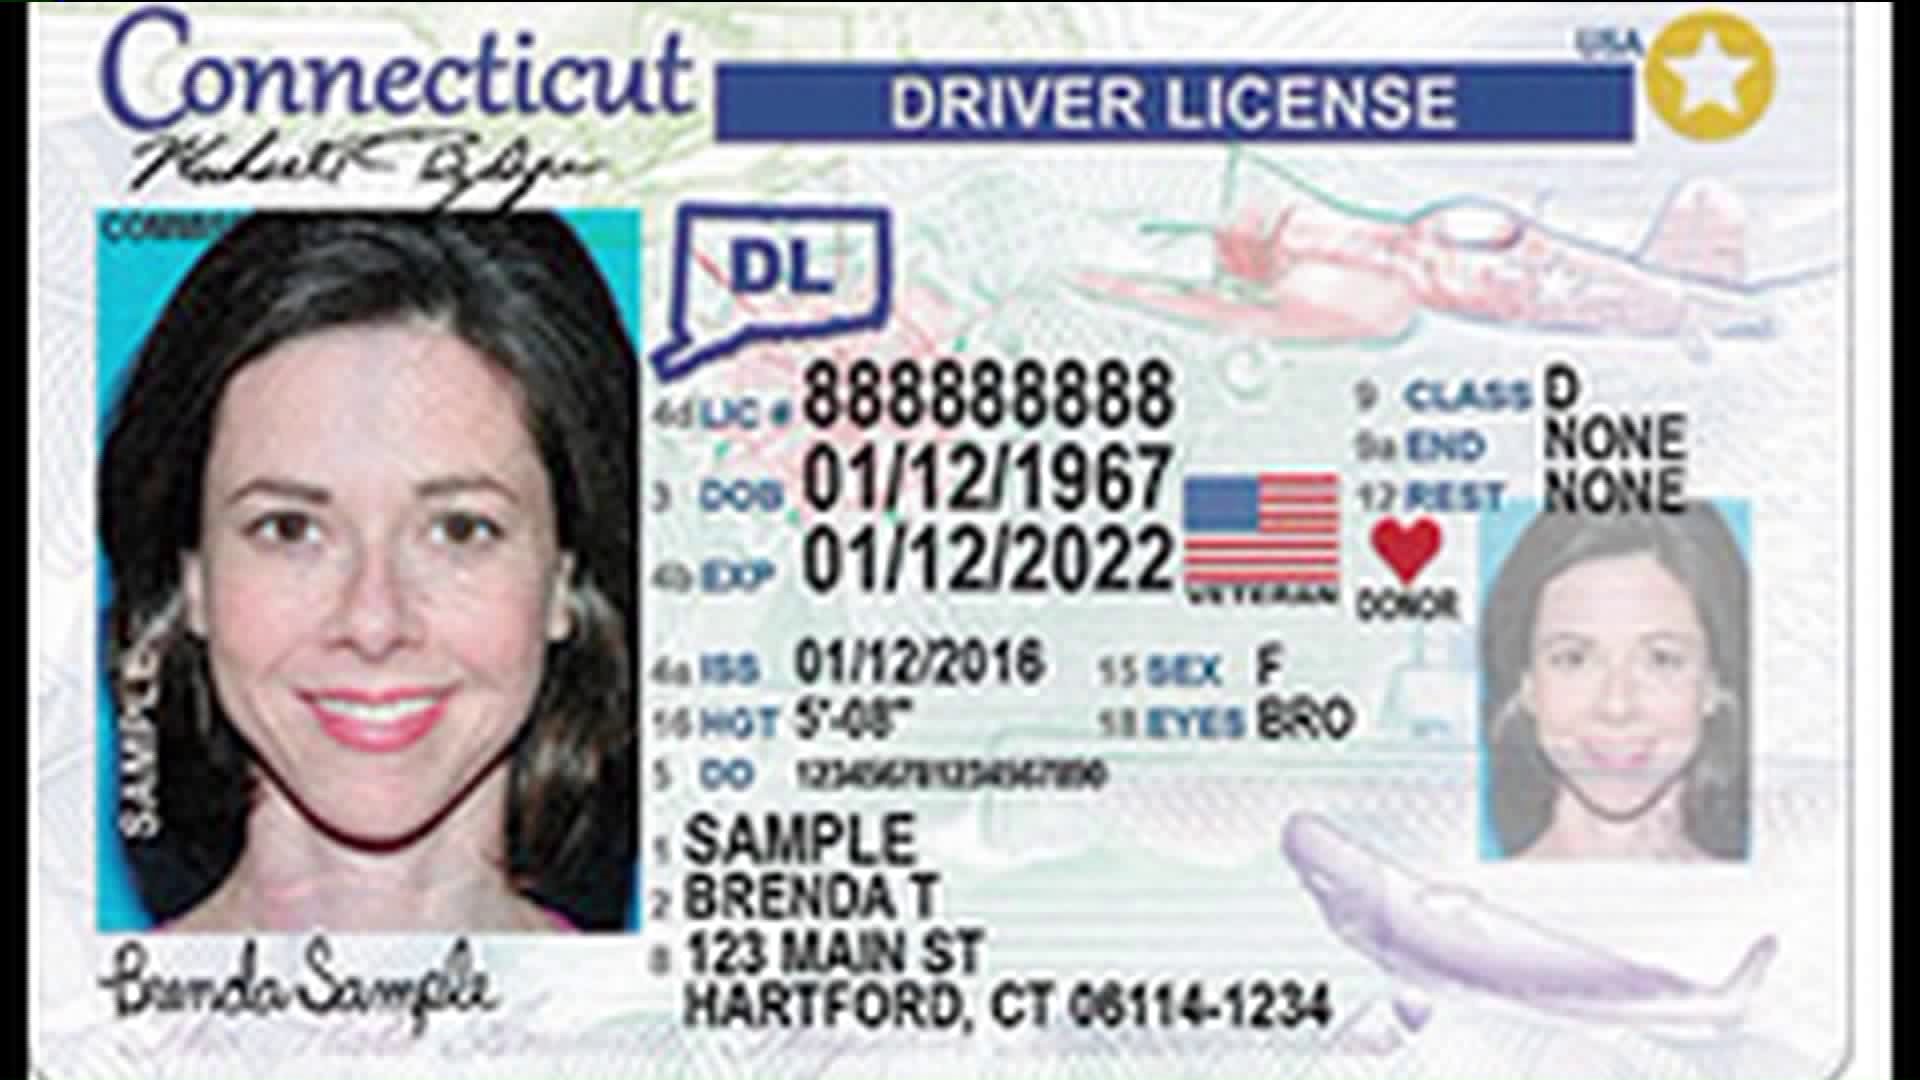 Don`t wait until the last minute to renew your license